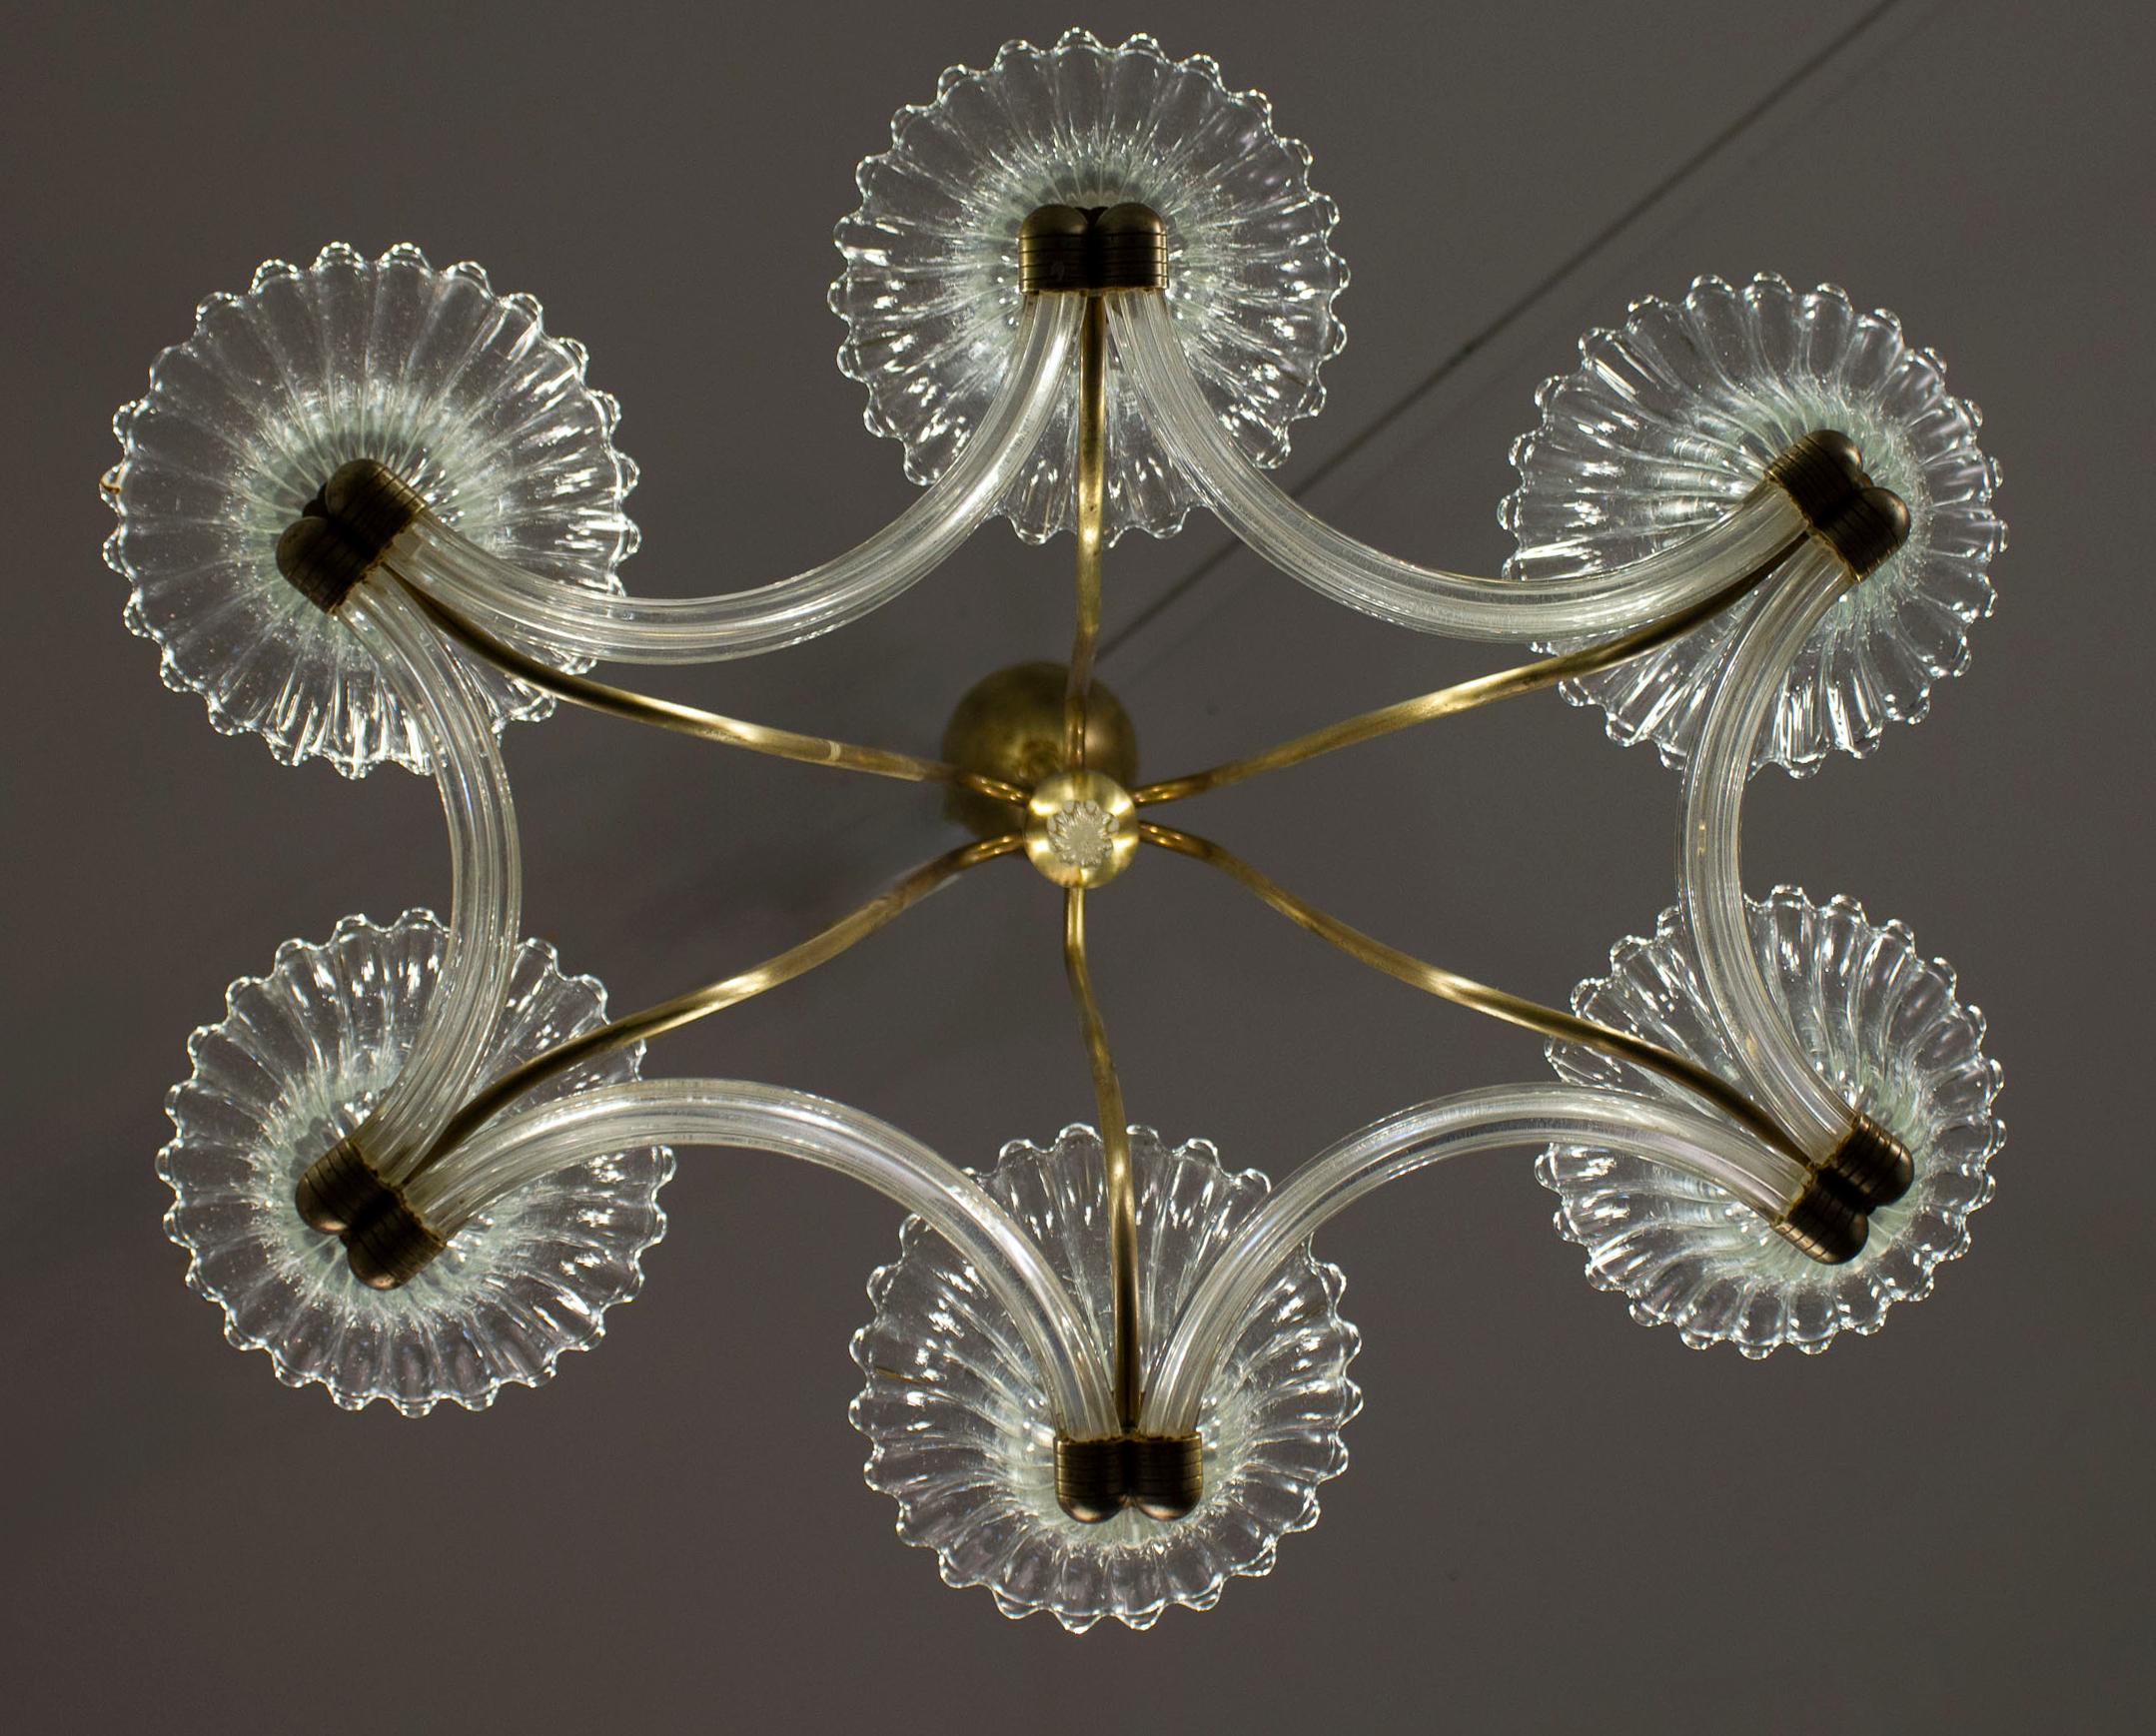 20th Century  Art Deco Brass Mounted Murano Glass Chandelier by Ercole Barovier 1940 For Sale